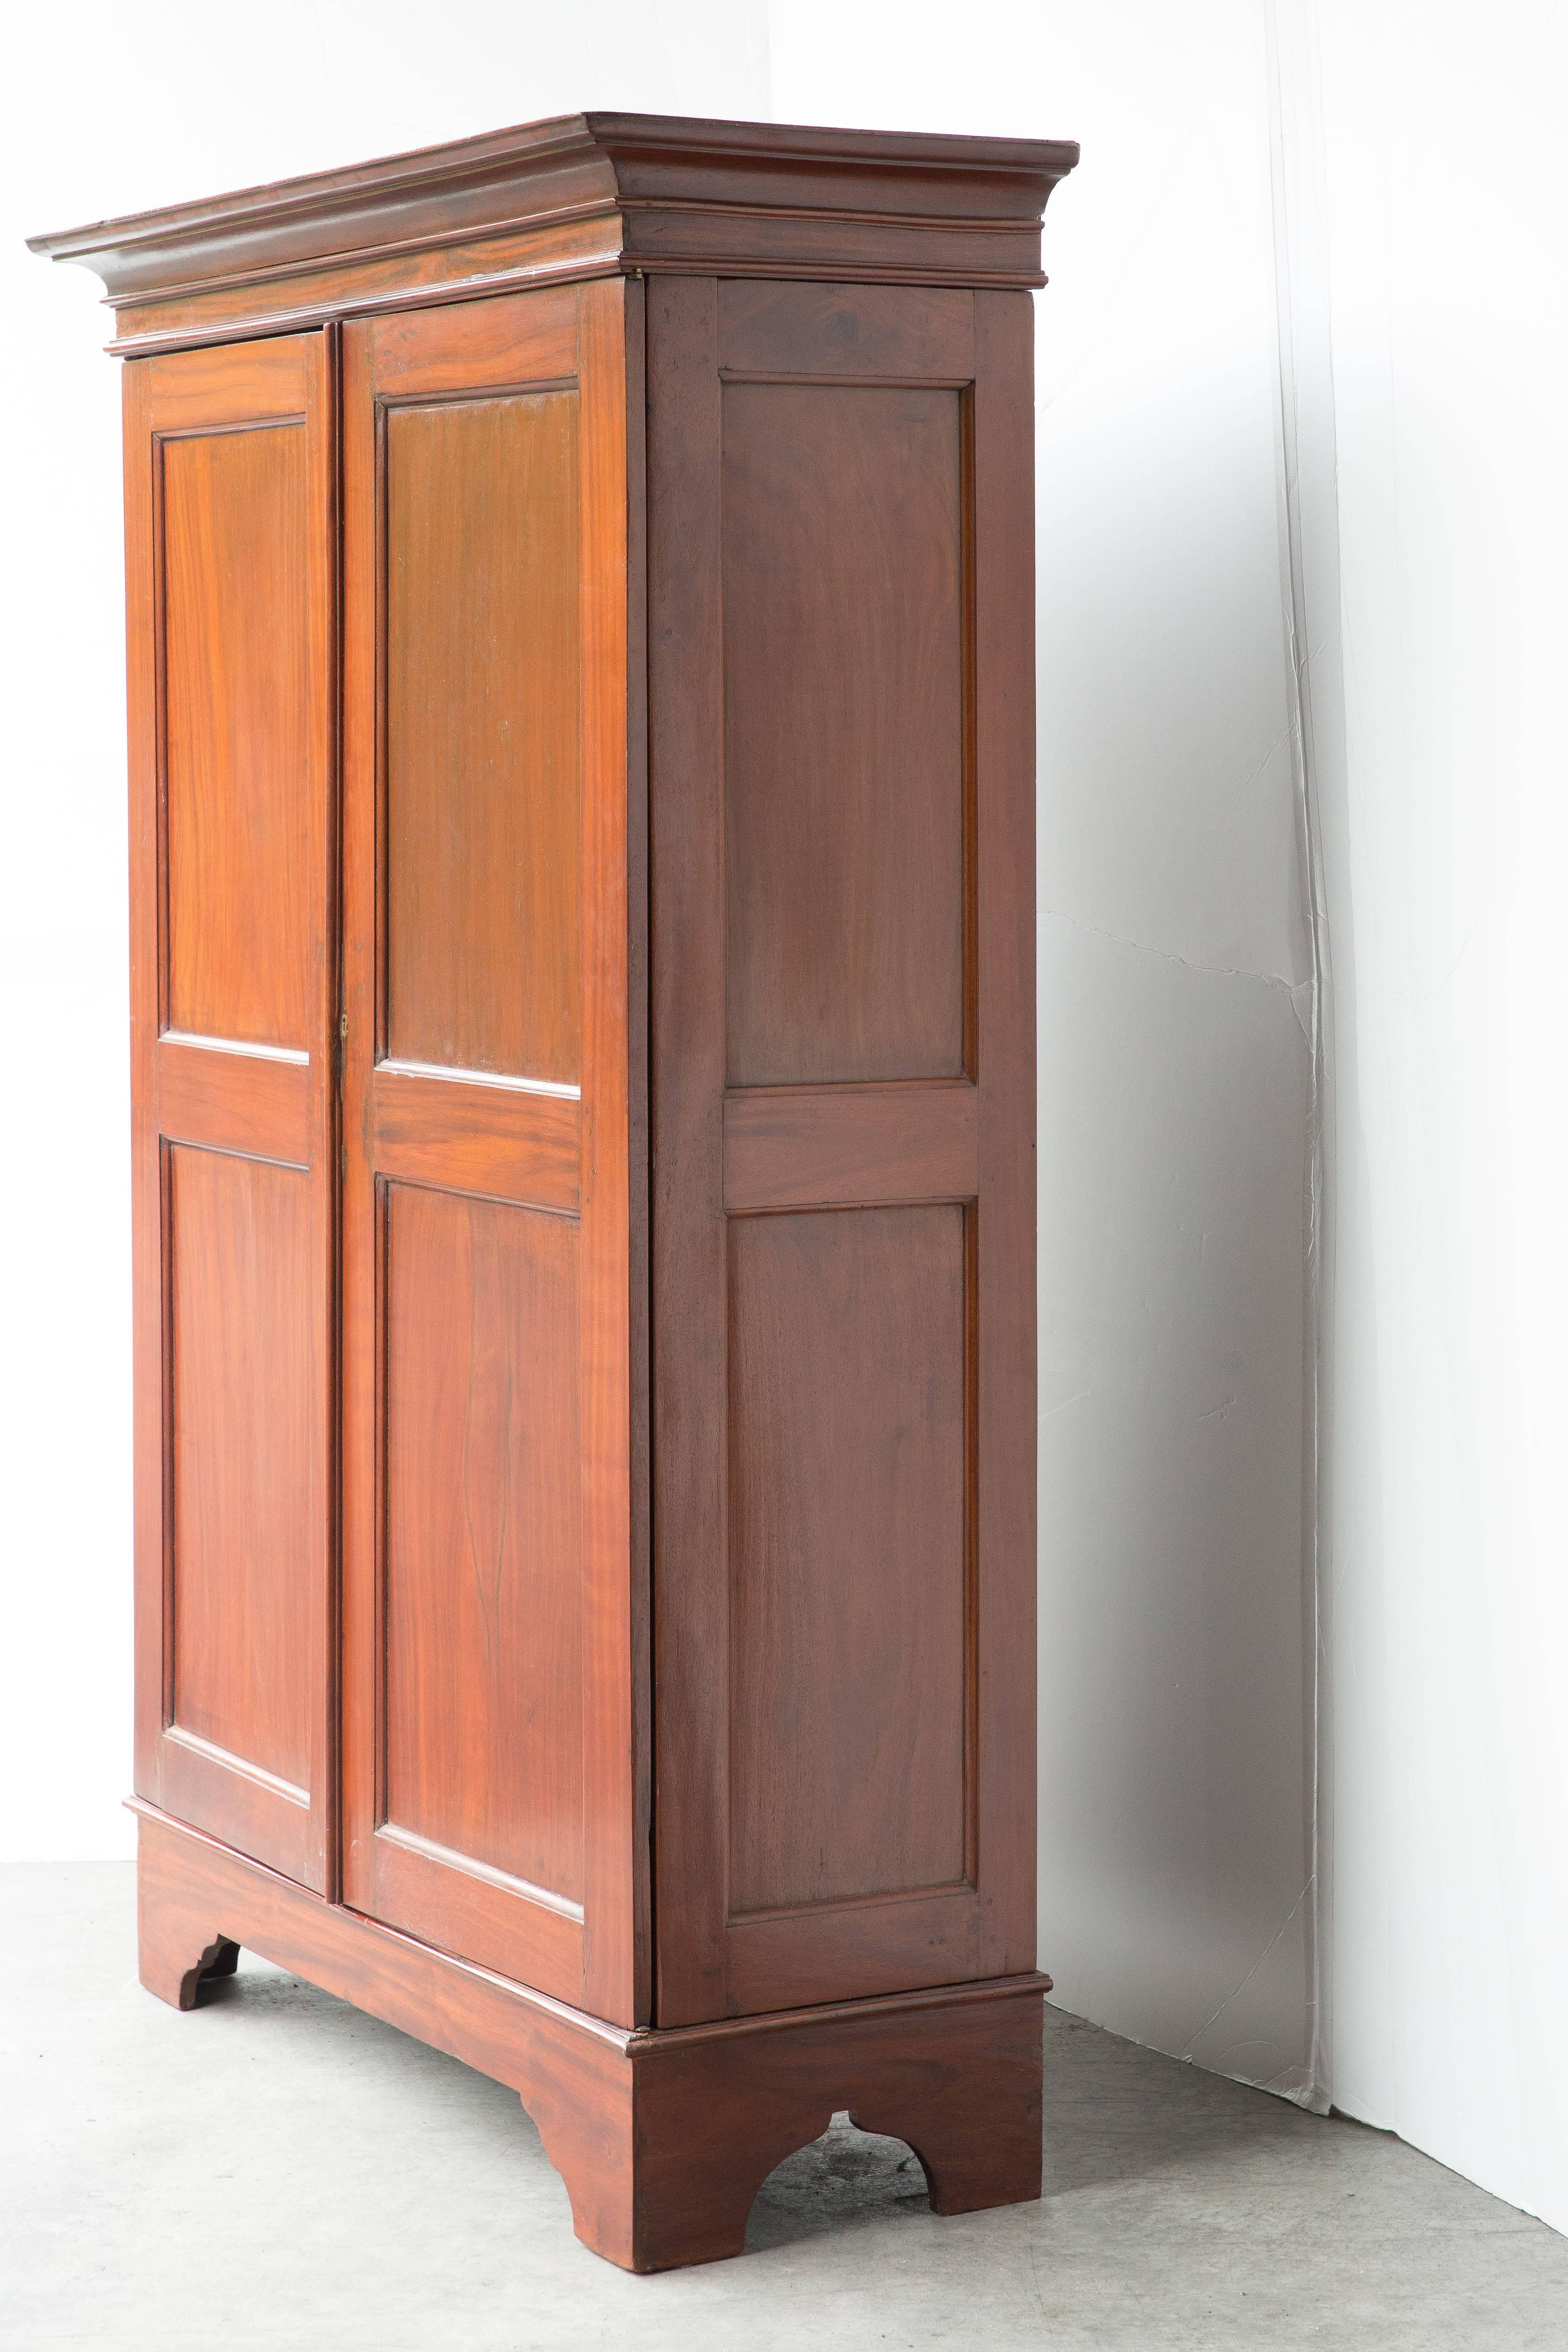 Dutch Colonial solid jackfruit wood armoire with three removable shelves. Armoire breaks down flat for transport. There is a second one as well that is the same footprint but slightly different design on the doors. 

Interior dimensions:

46